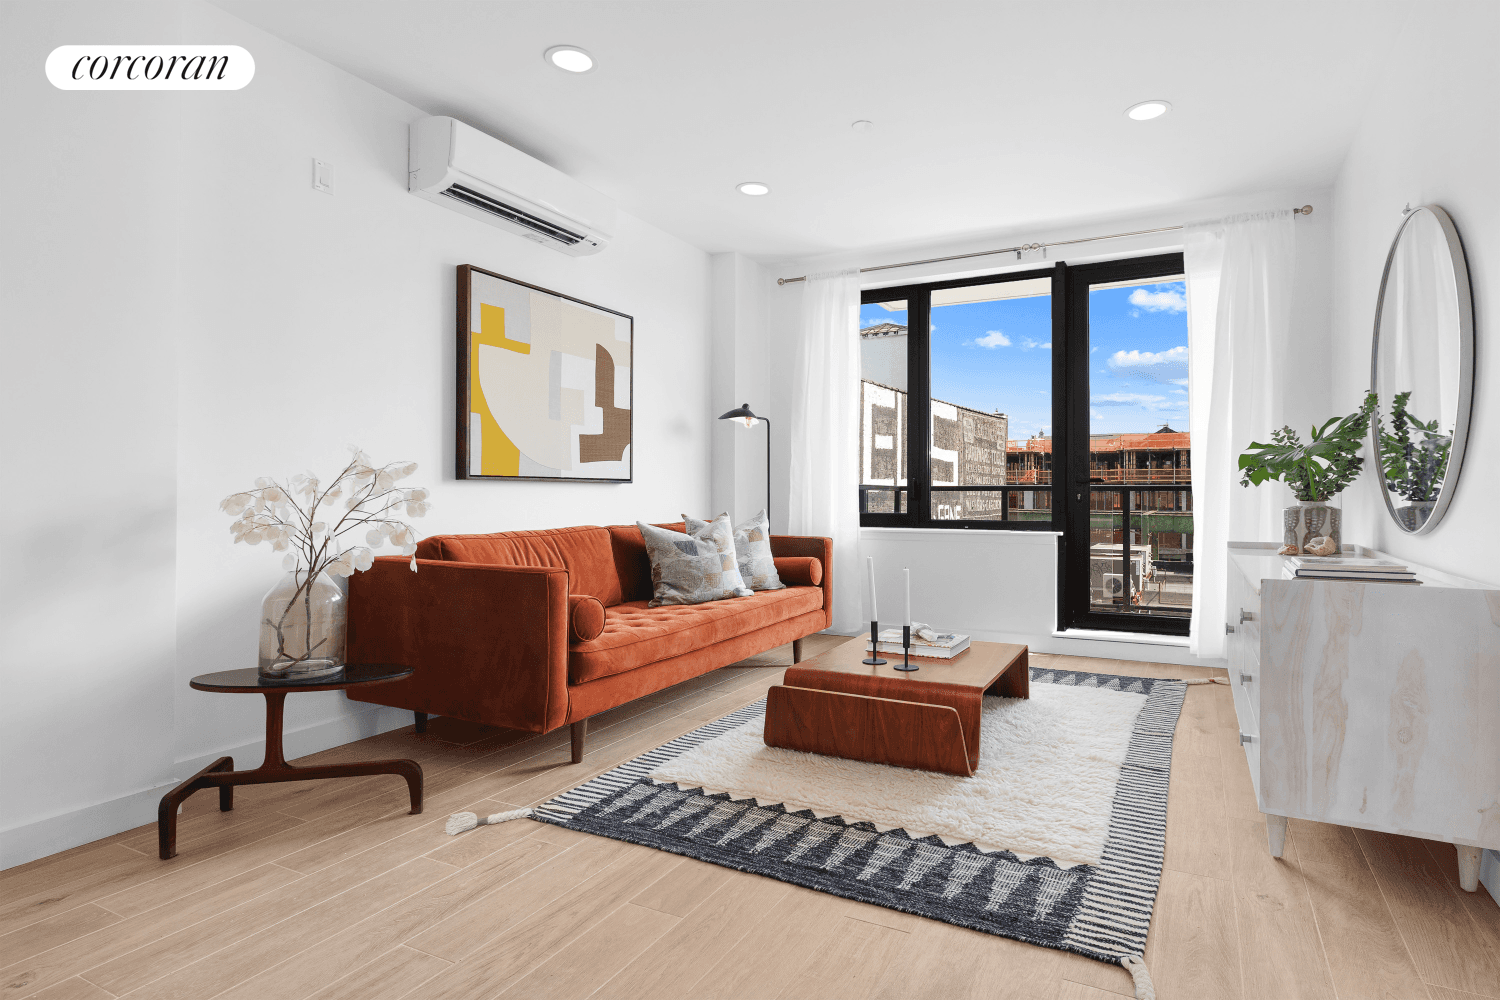 6O 2 Bed 2 Bath with Balcony 1 Month complimentary Rent Net 3529Situated on the border of Bed Stuy and Bushwick, The Stockton located at 912 Broadway is a brand ...